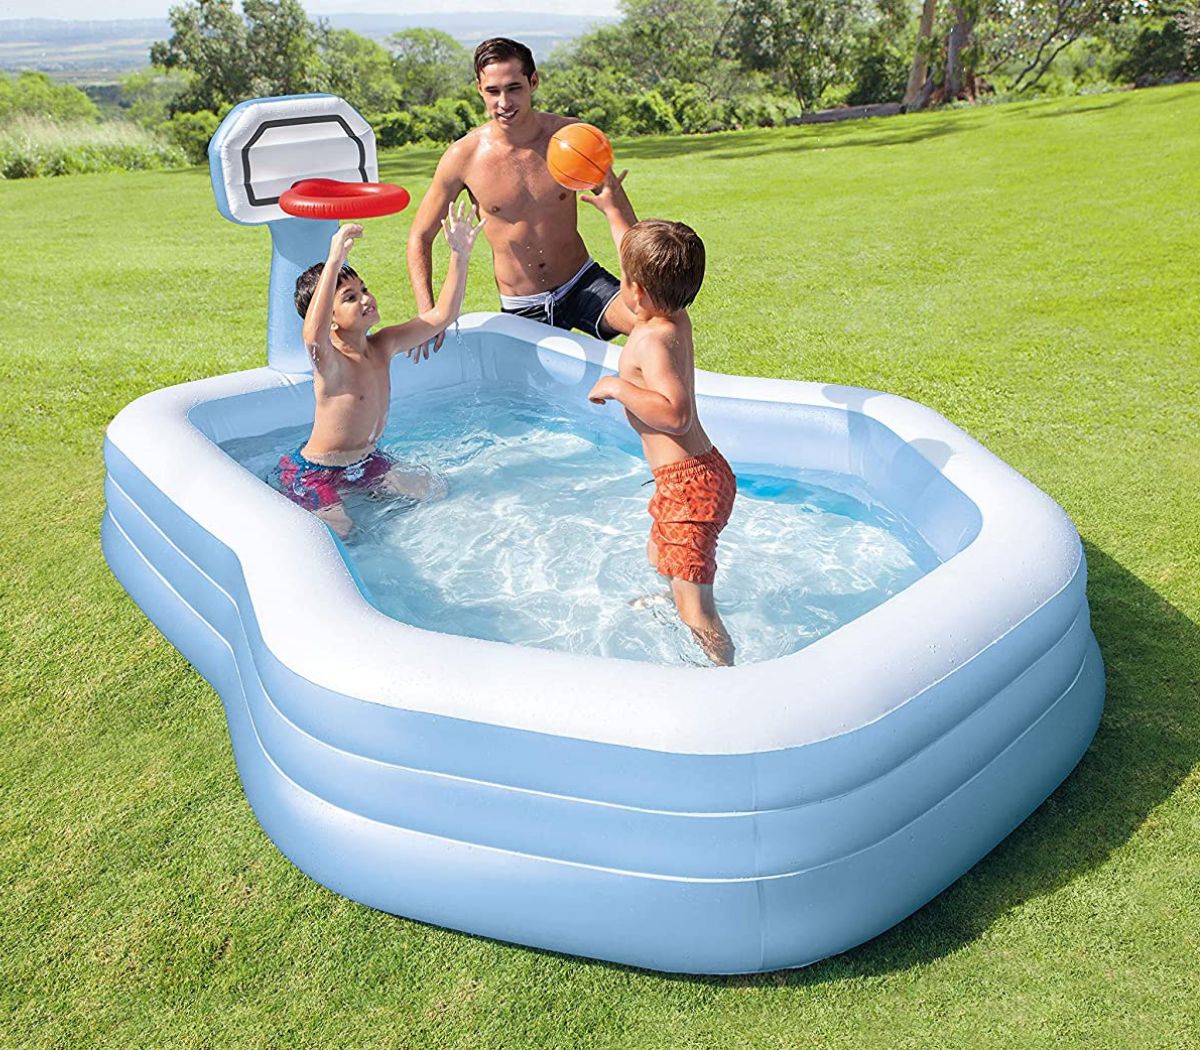 A dad and two sons shooting hoops in inflatable basketball themed pool